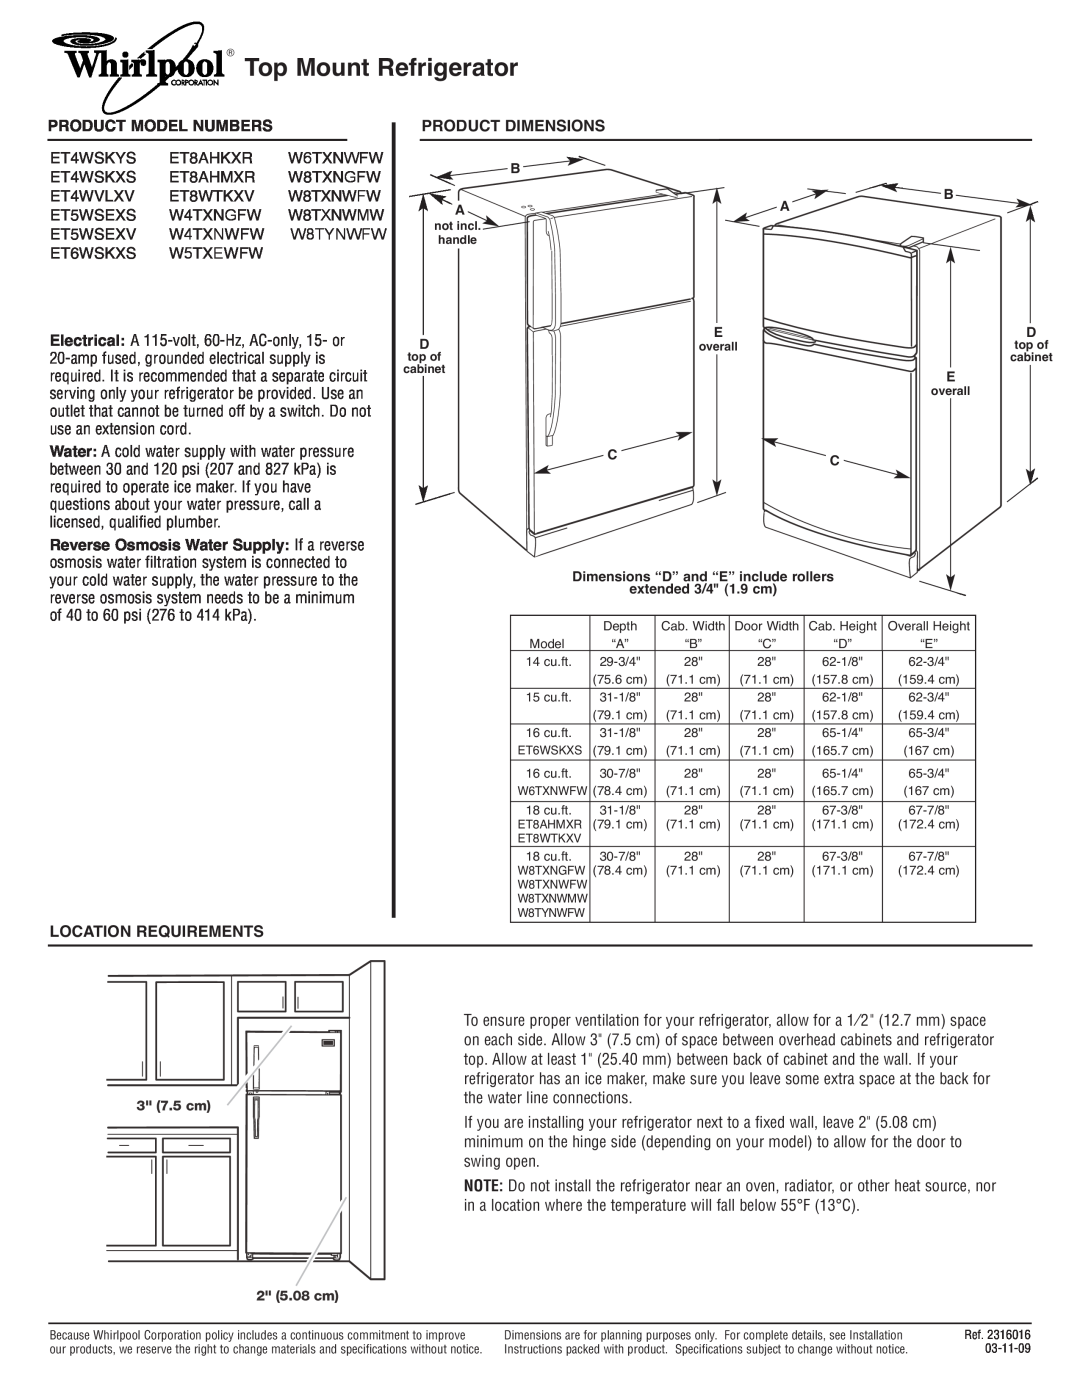 Whirlpool W4TXNGFW dimensions Top Mount Refrigerator, Product Model Numbers, Location Requirements, Product Dimensions 